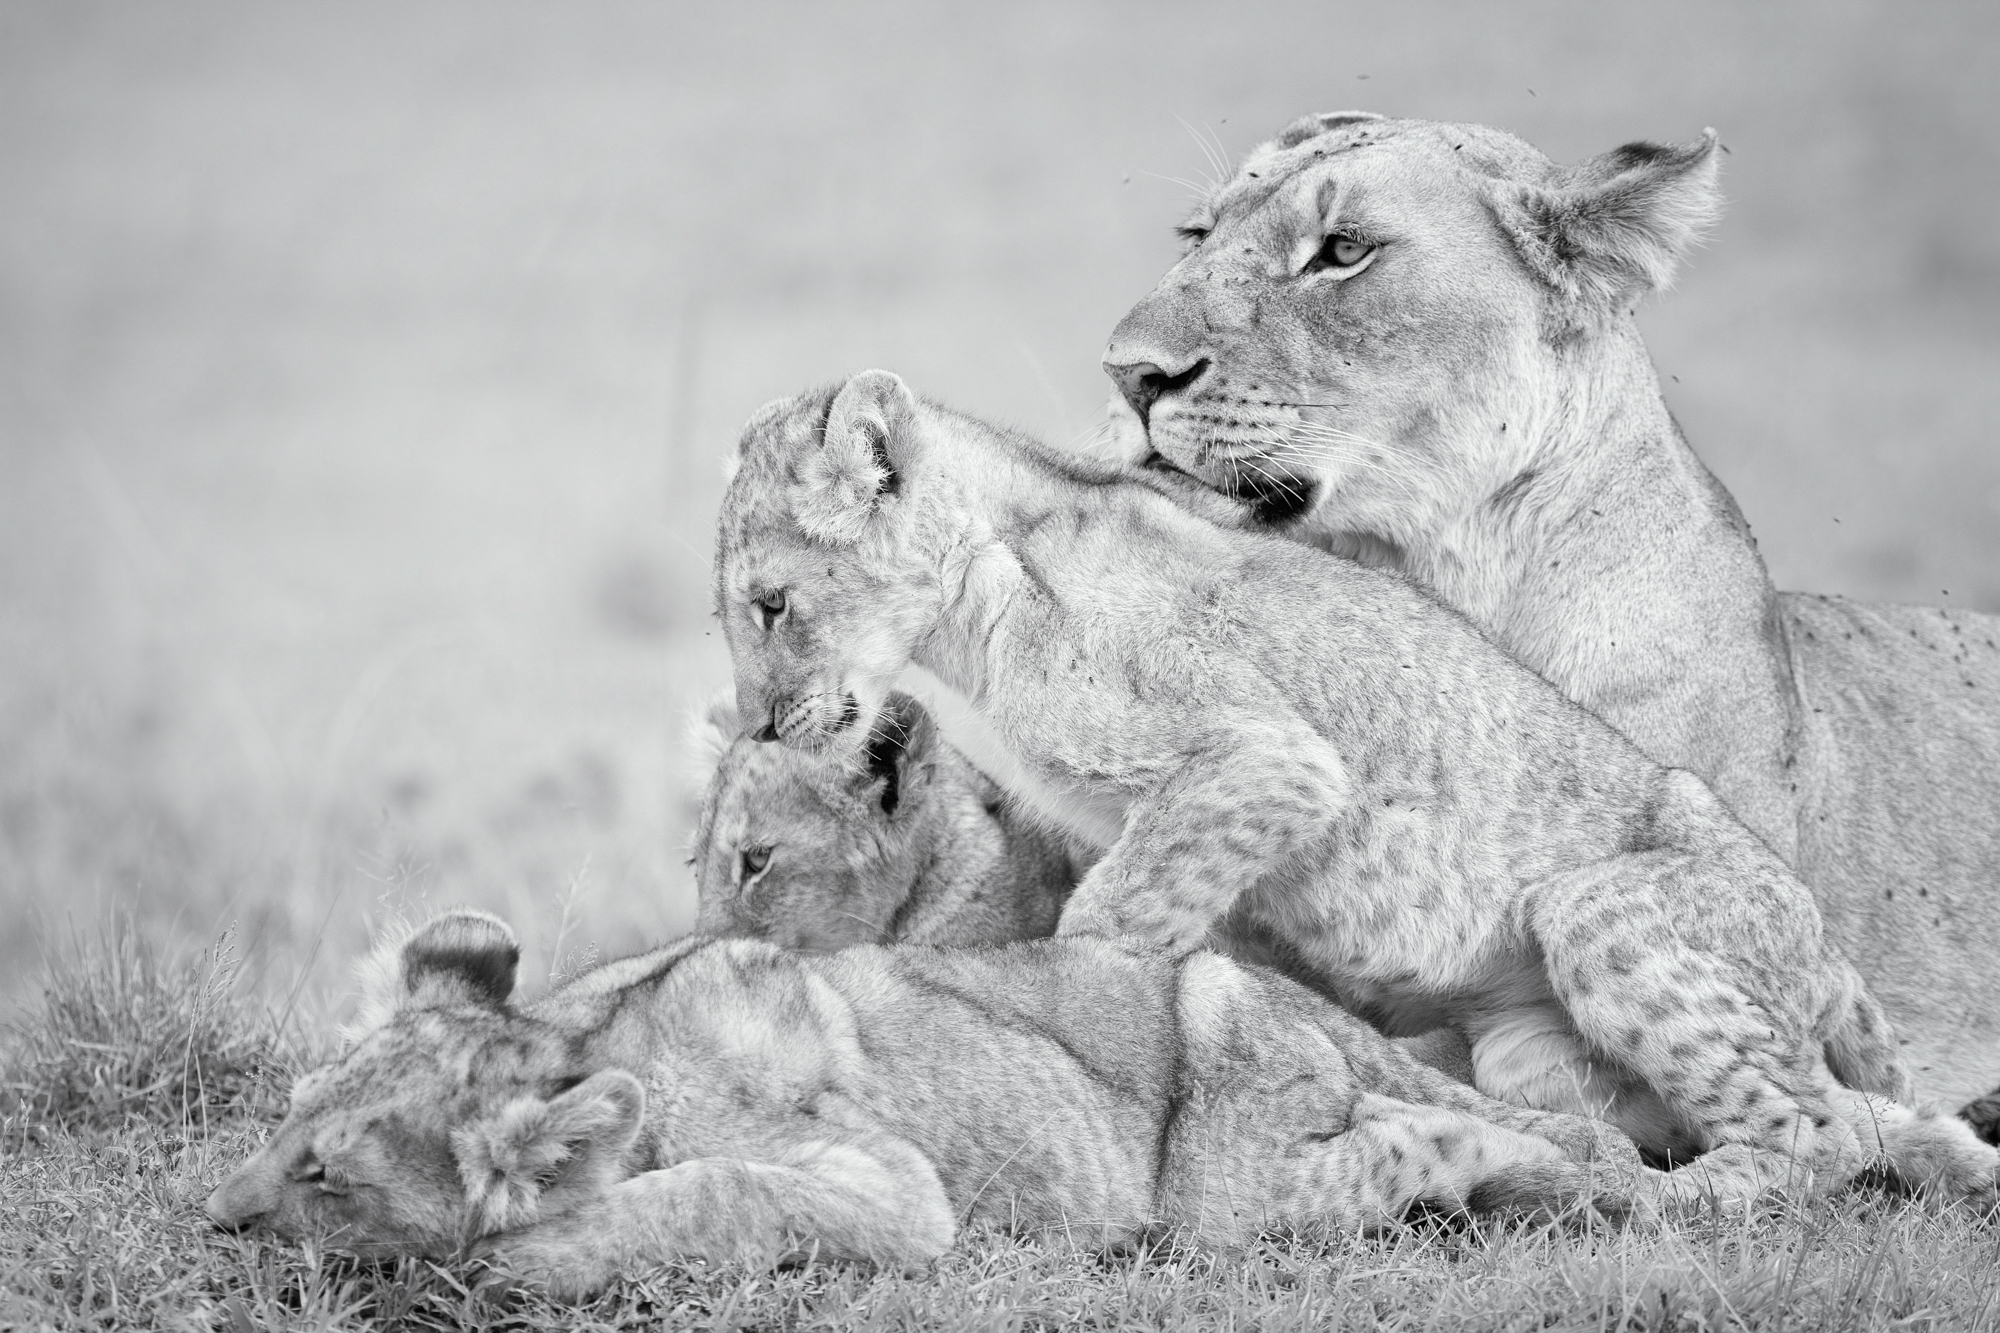 A lioness and her cubs.